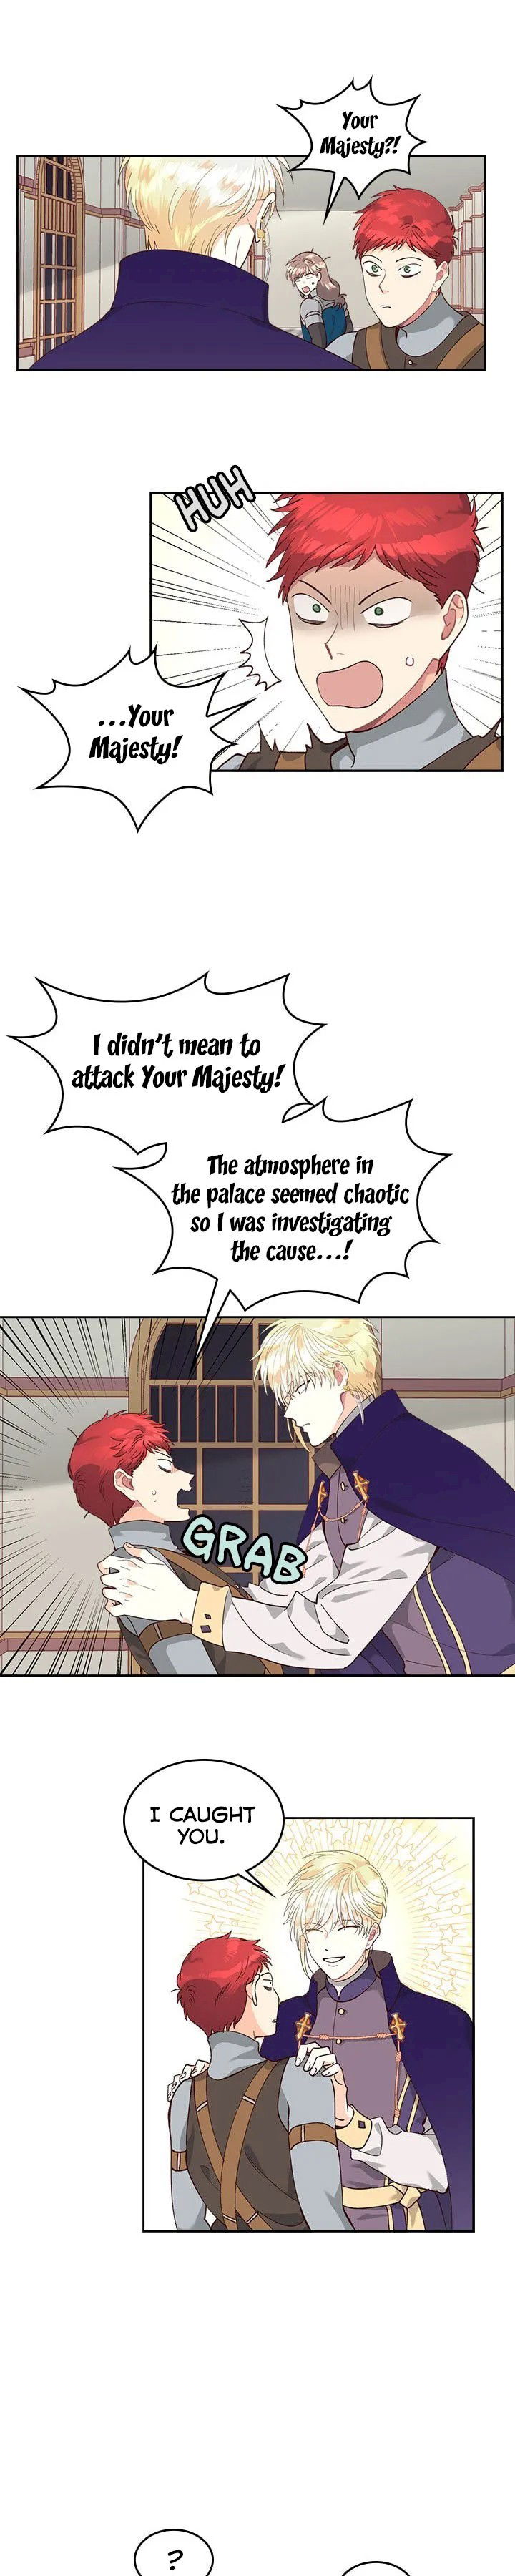 emperor-and-the-female-knight-chap-22-19